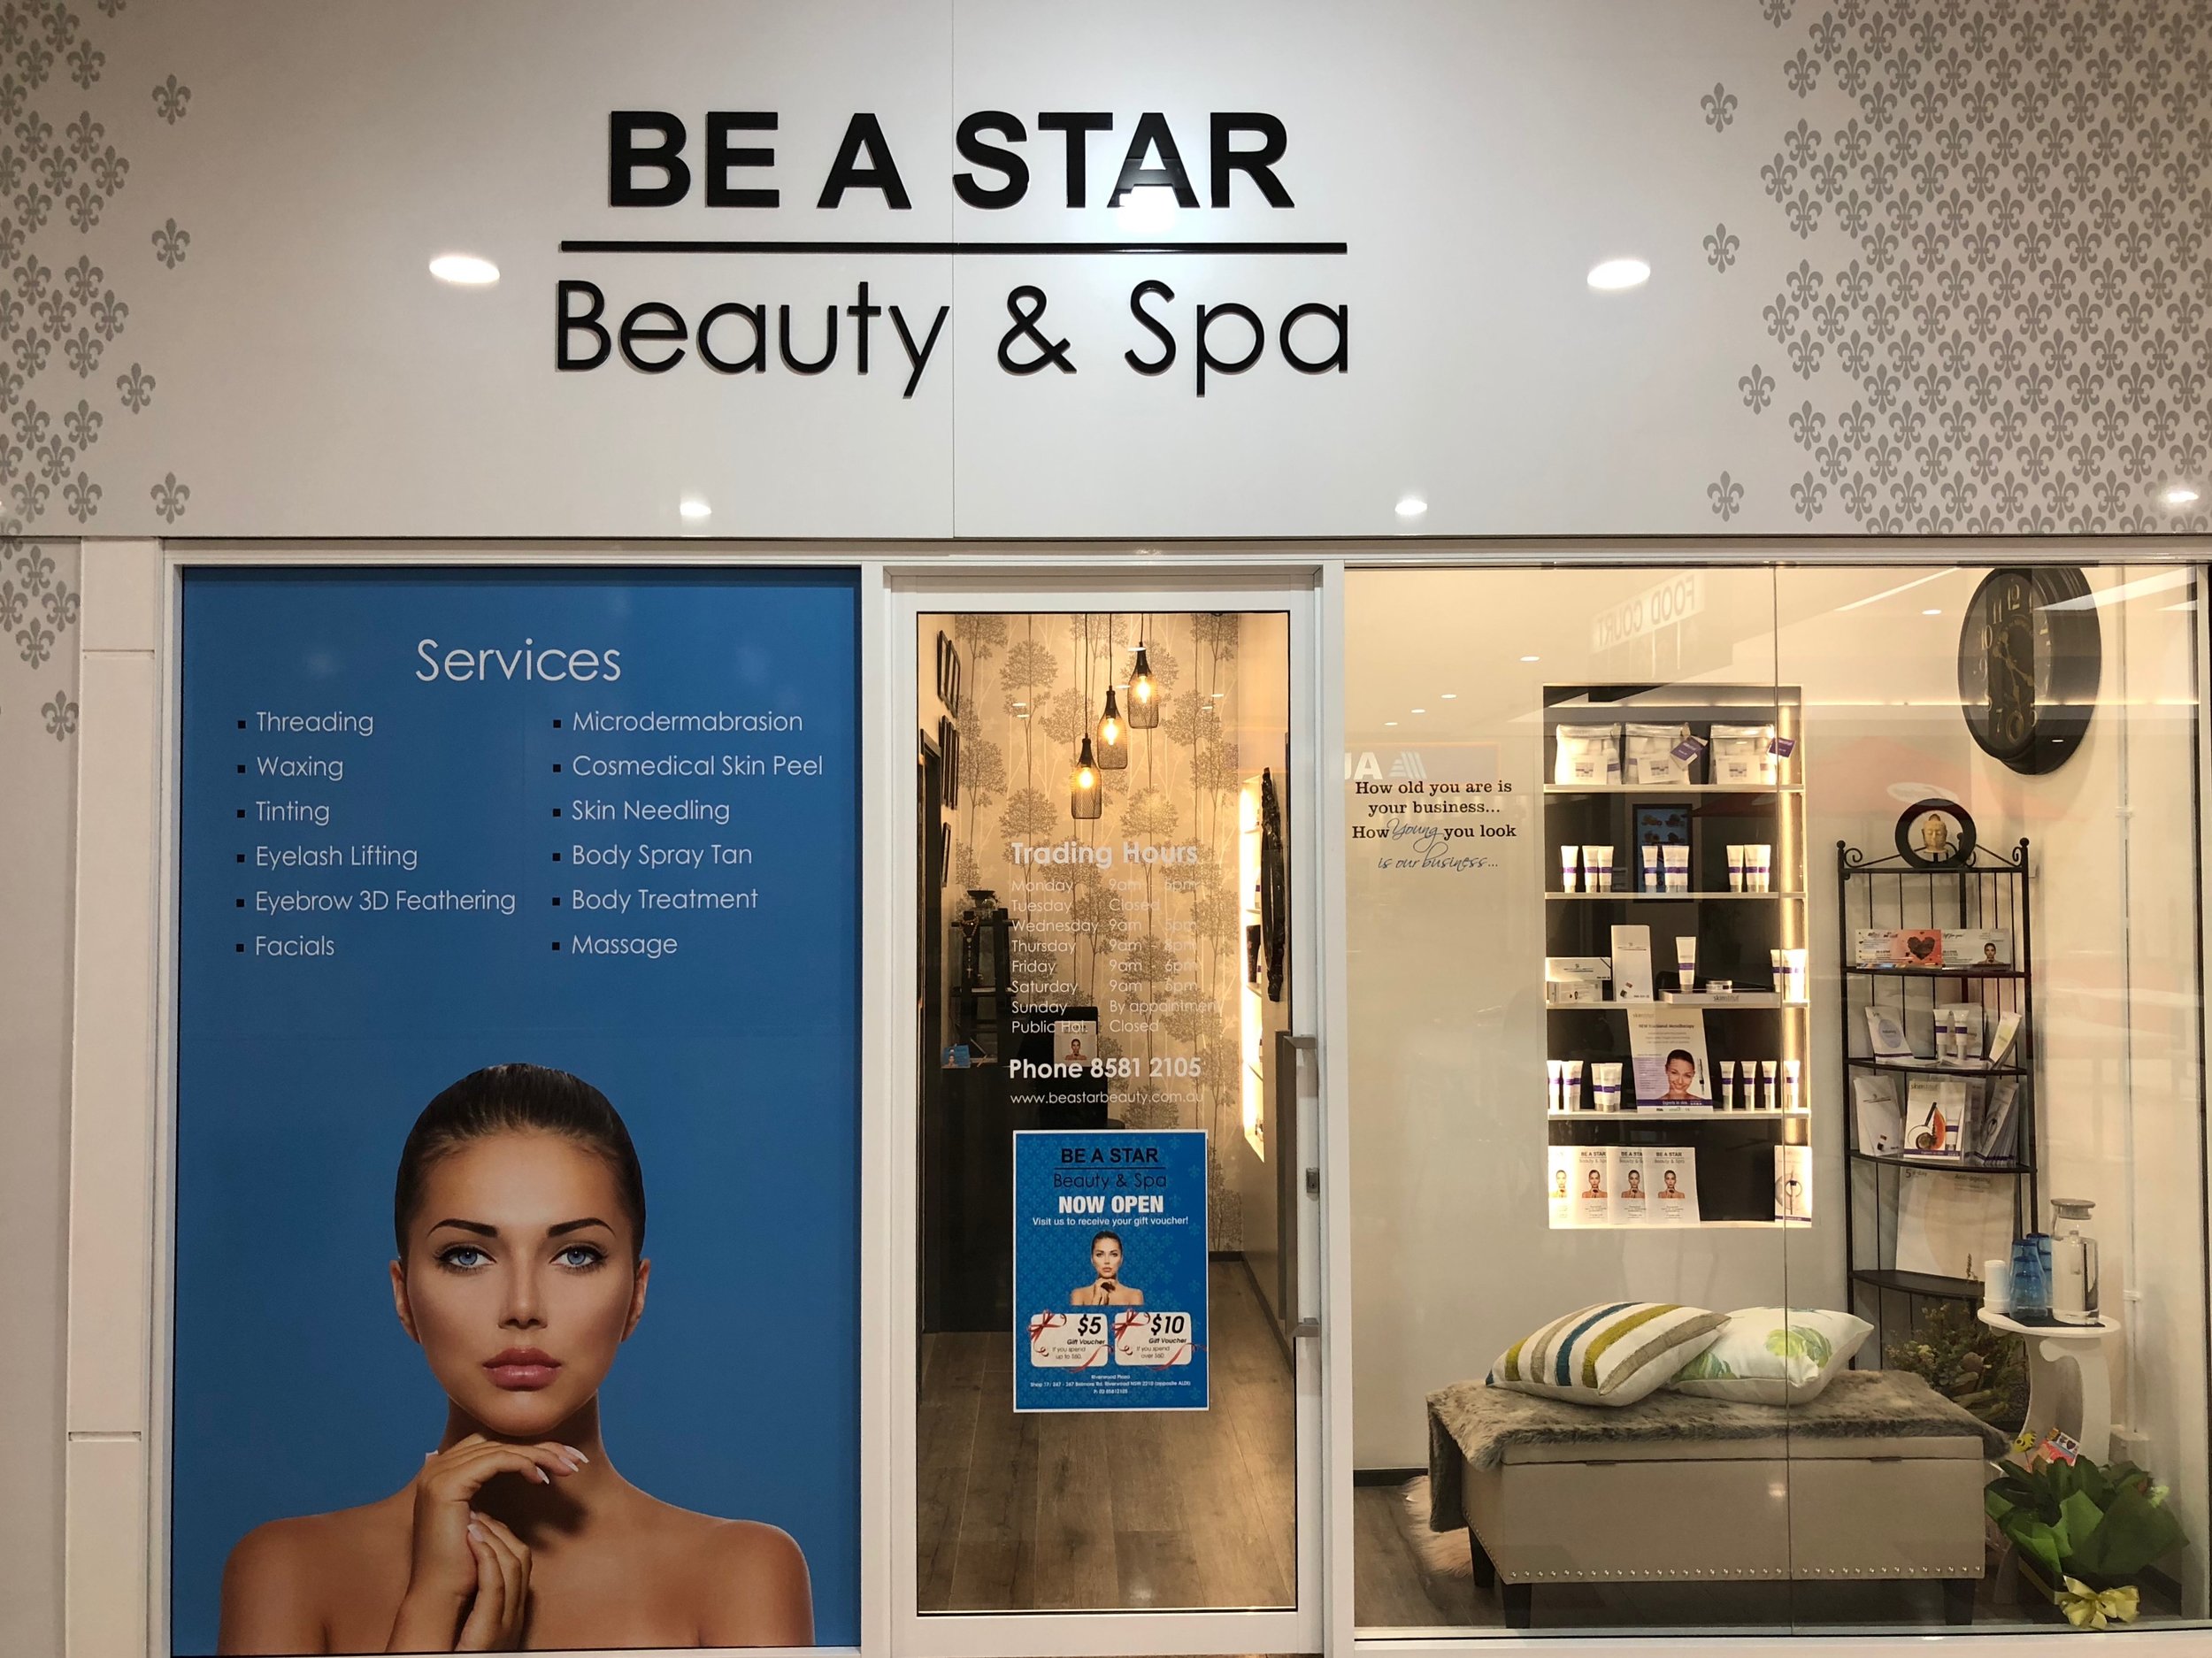 Be a star, Beauty and Spa at Riverwood Plaza Shopping Centre